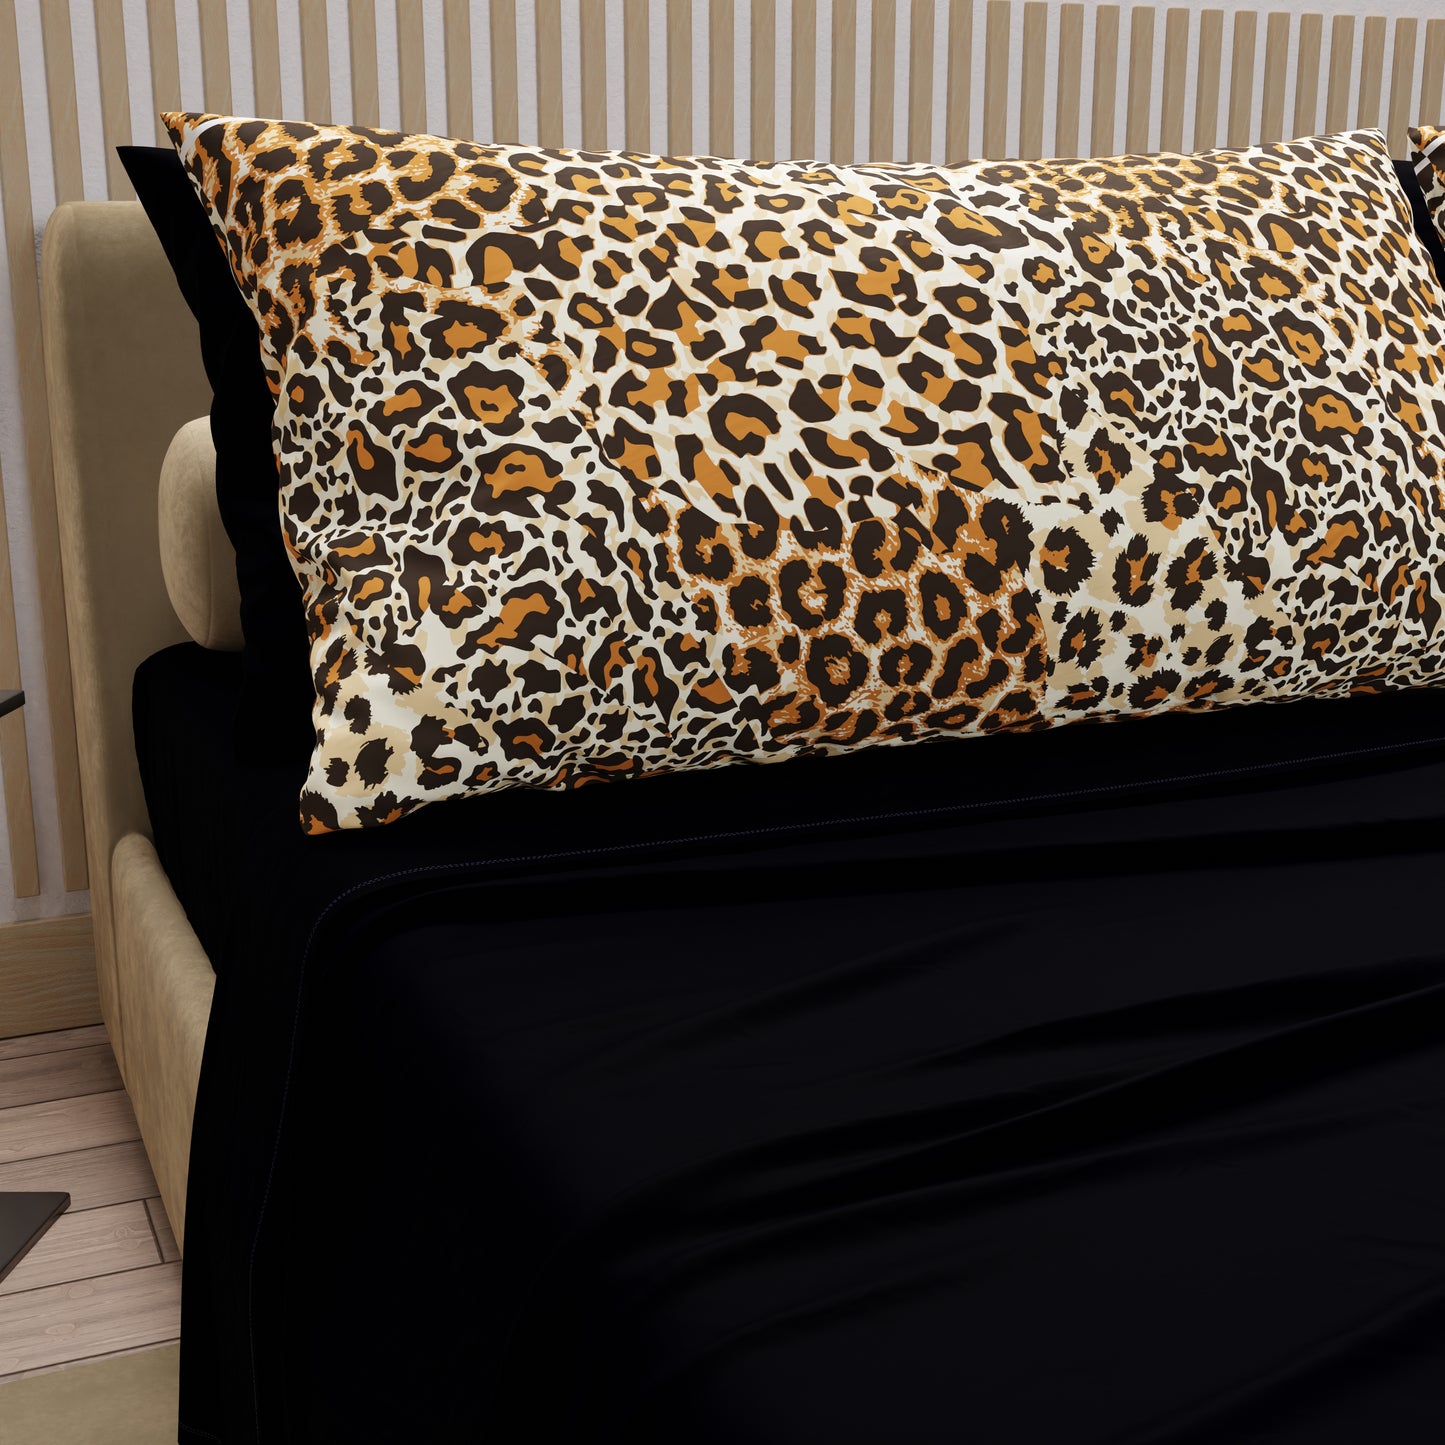 Cotton Sheets, Bed Set with Spotted Animal Digital Print Pillowcases